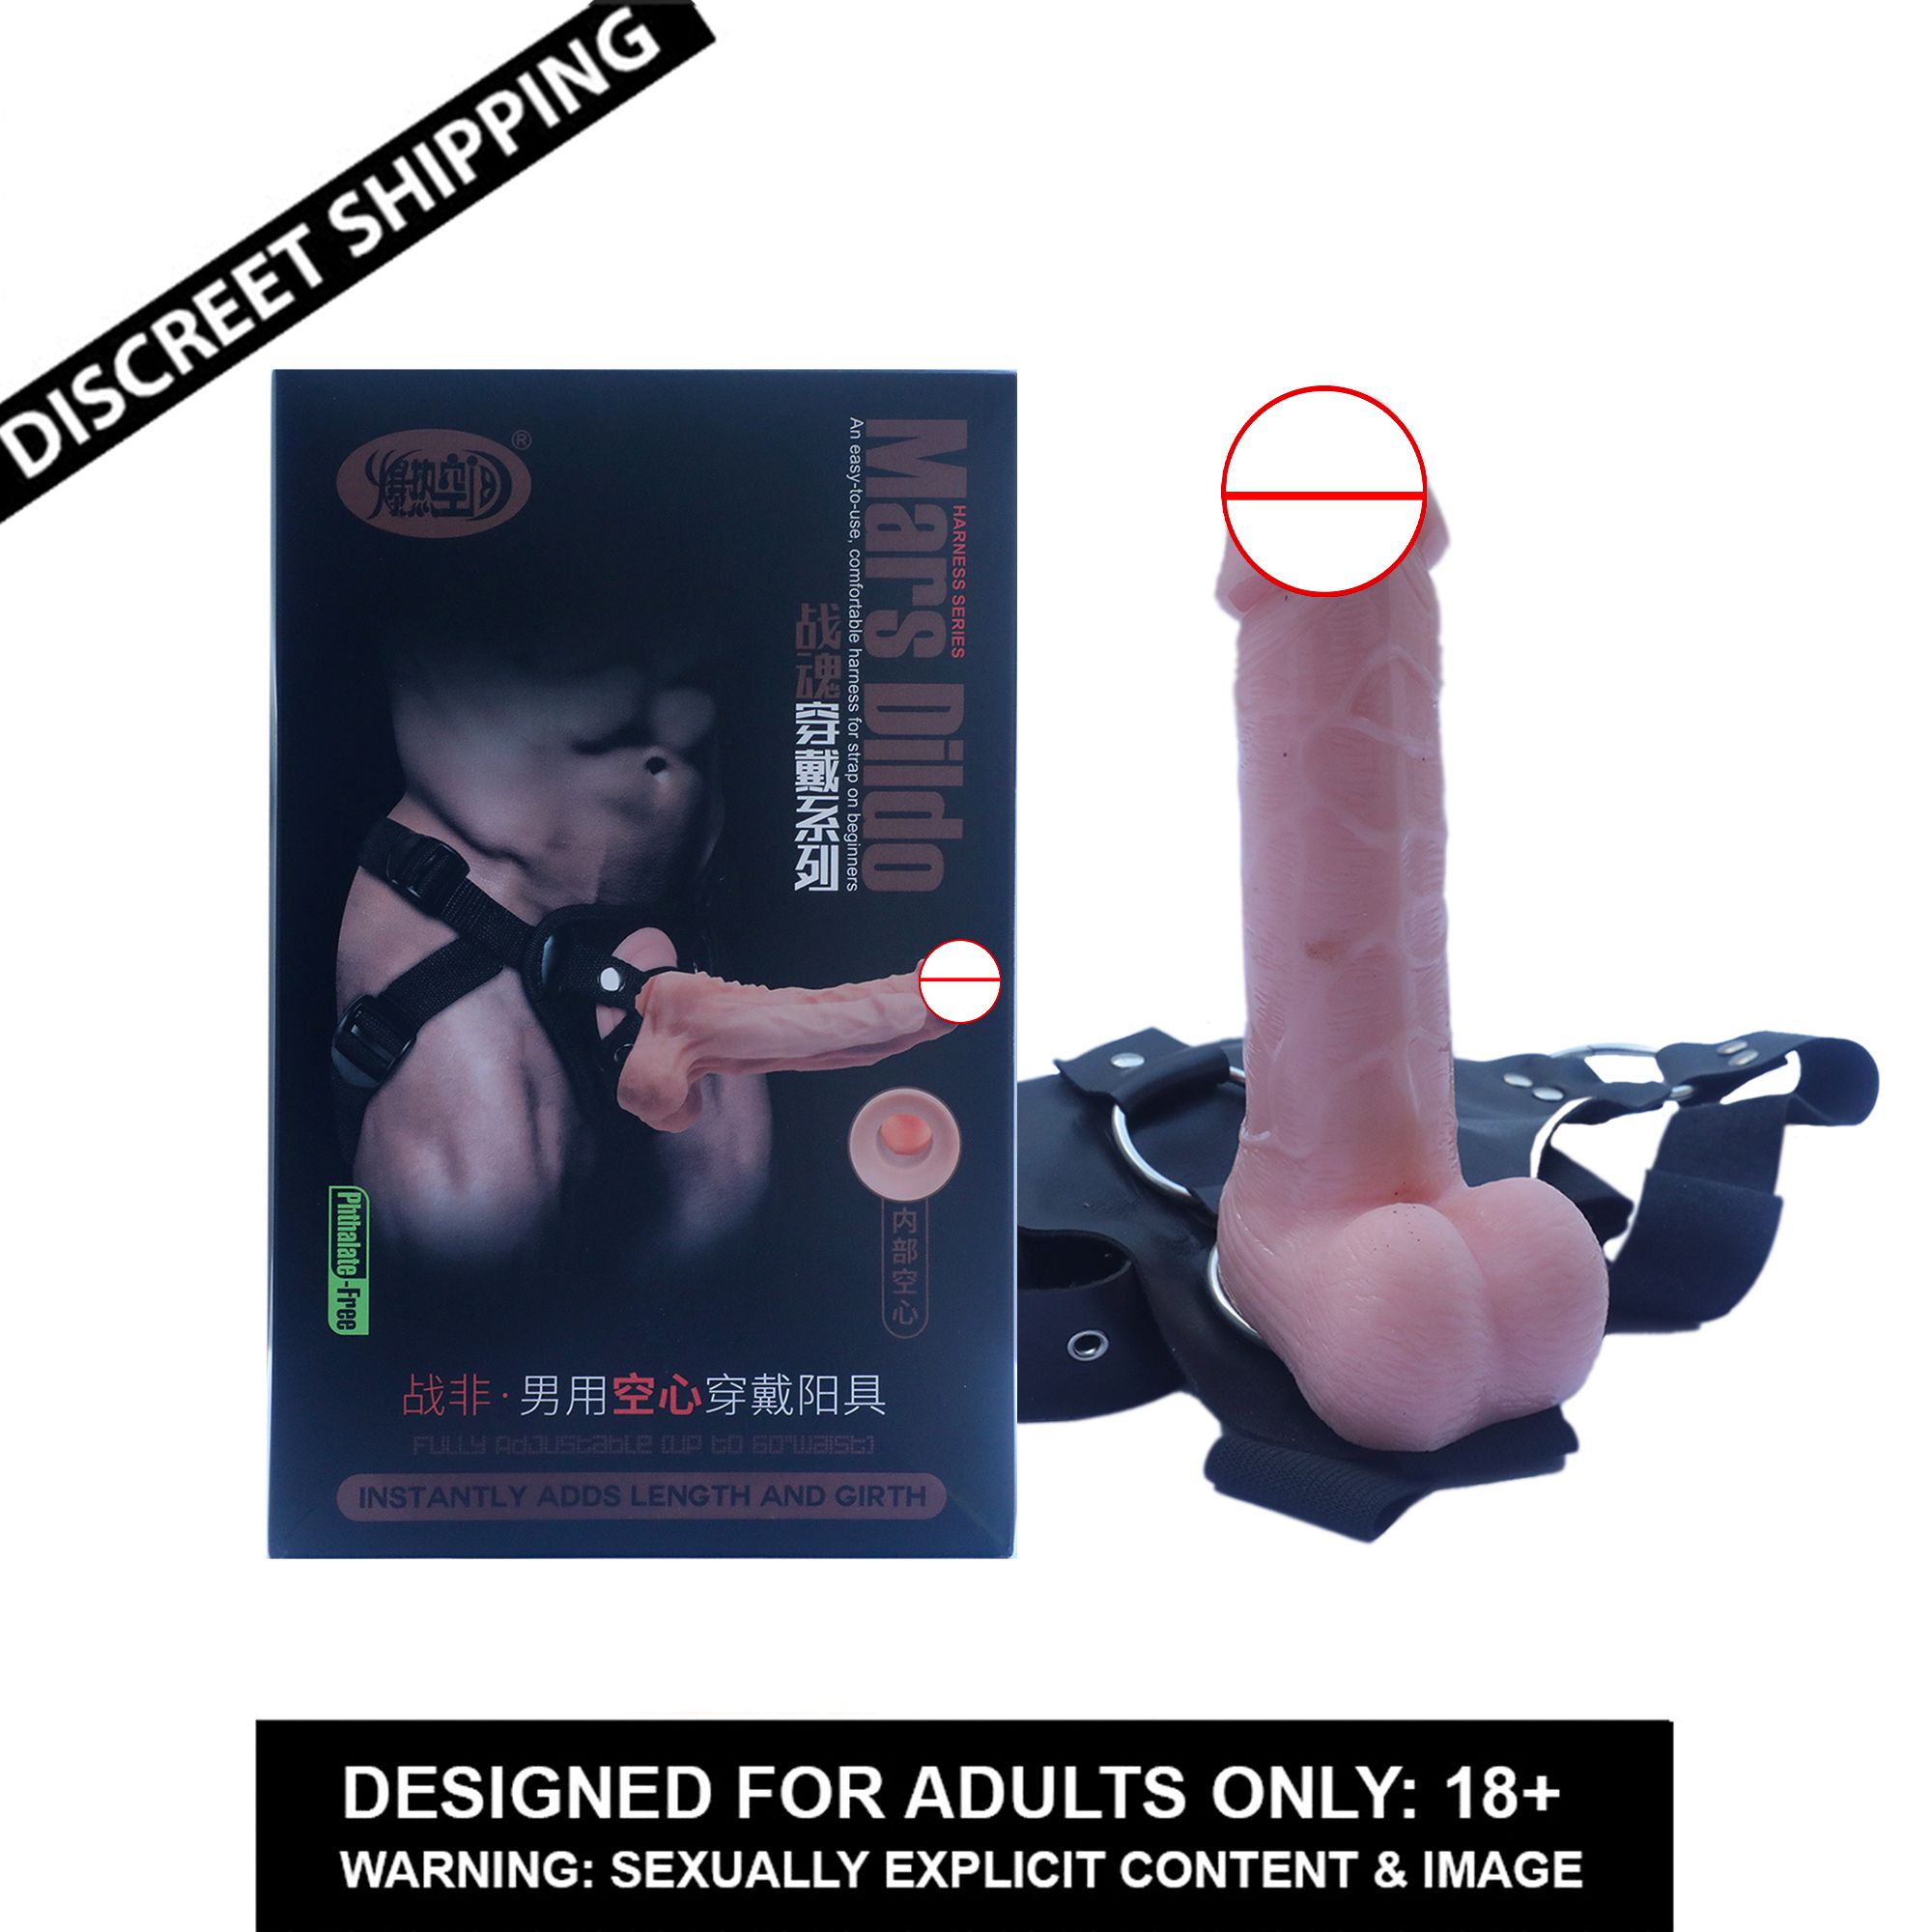     			Superior Quality Mars Dildo 8 Inch Strap on Artificial Penis Dildo Sex Toy For Women & Men by "SEX TANTRA"